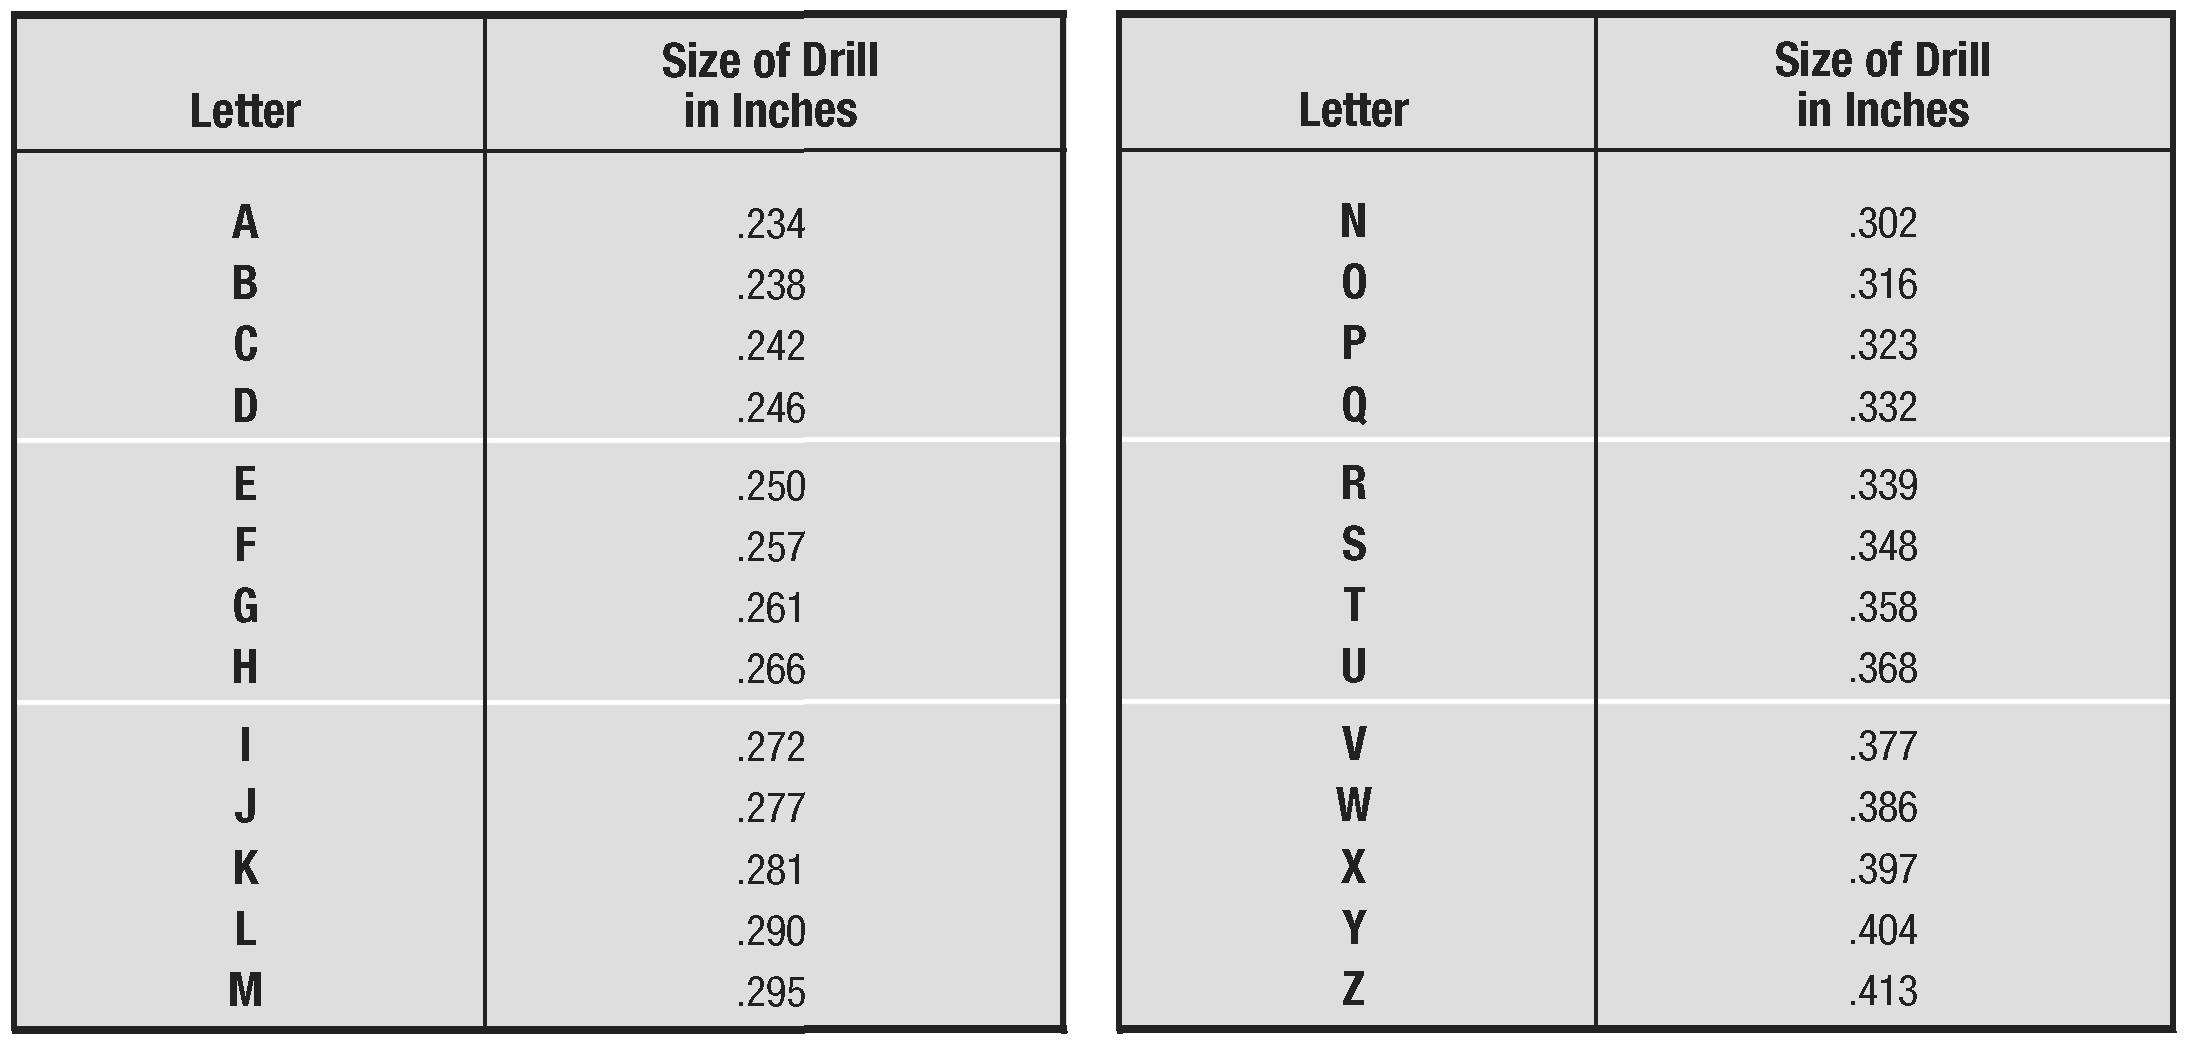 What Is Letter Size